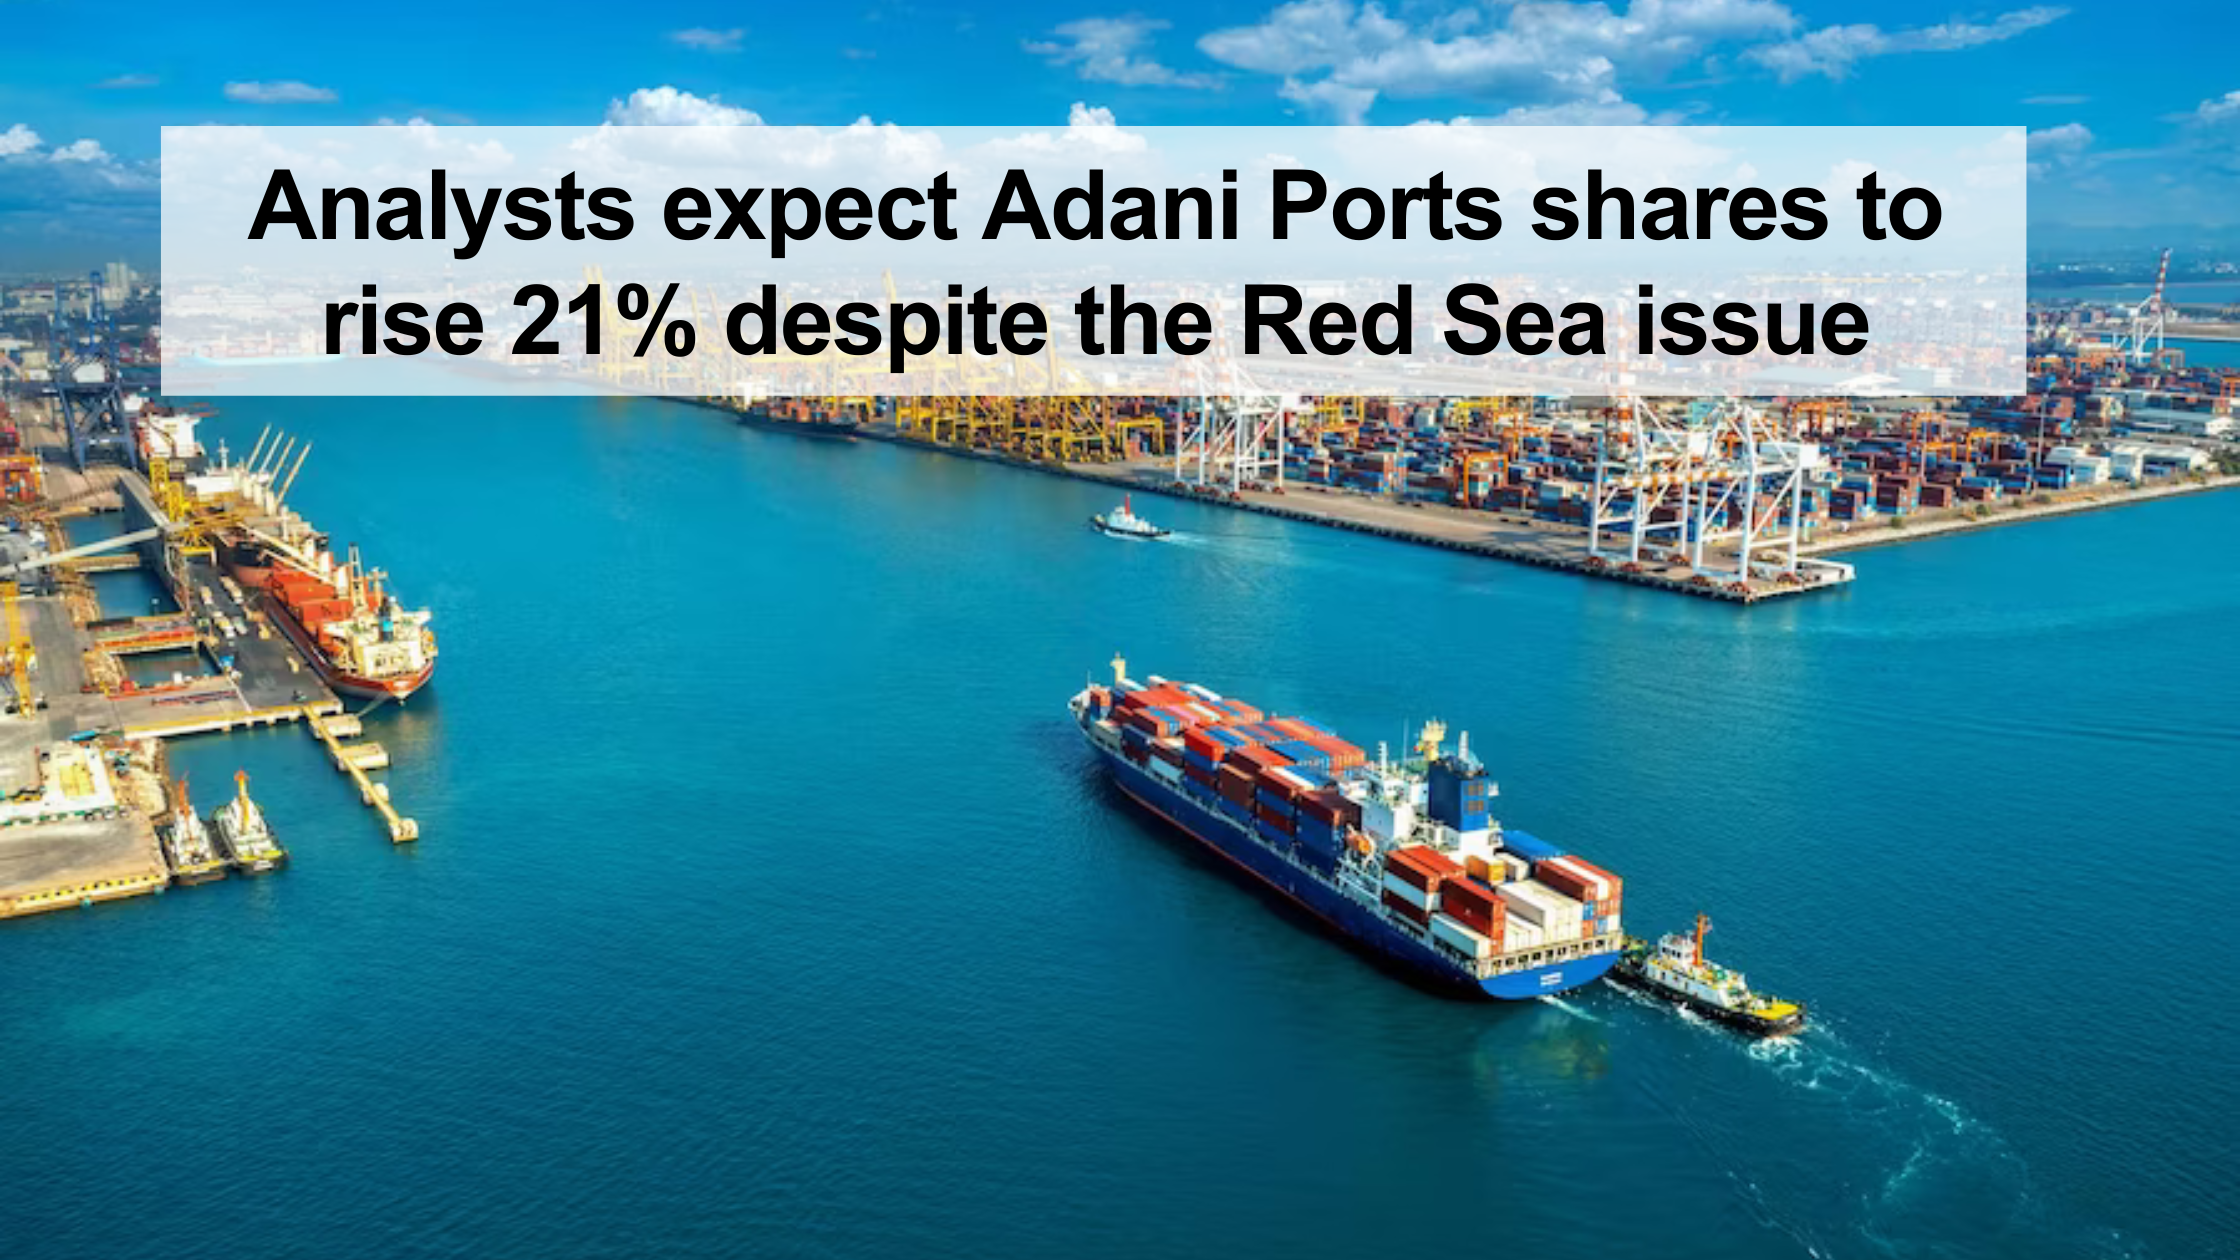 Analysts expect Adani Ports shares to rise 21% despite the Red Sea issue